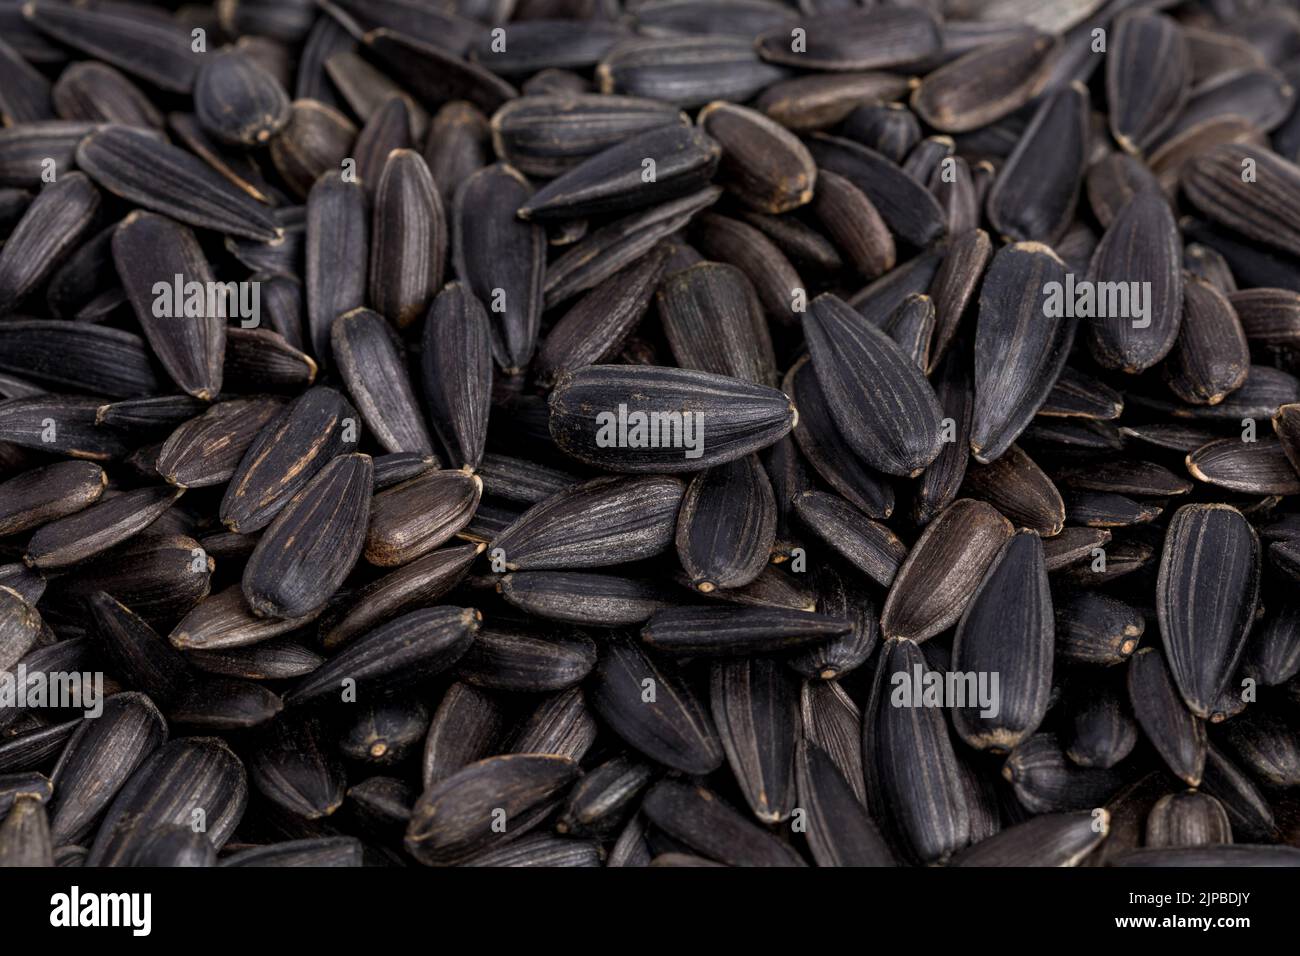 Closeup of black sunflower seeds. Sunflower oil, oilseed farming and agriculture concept. Stock Photo